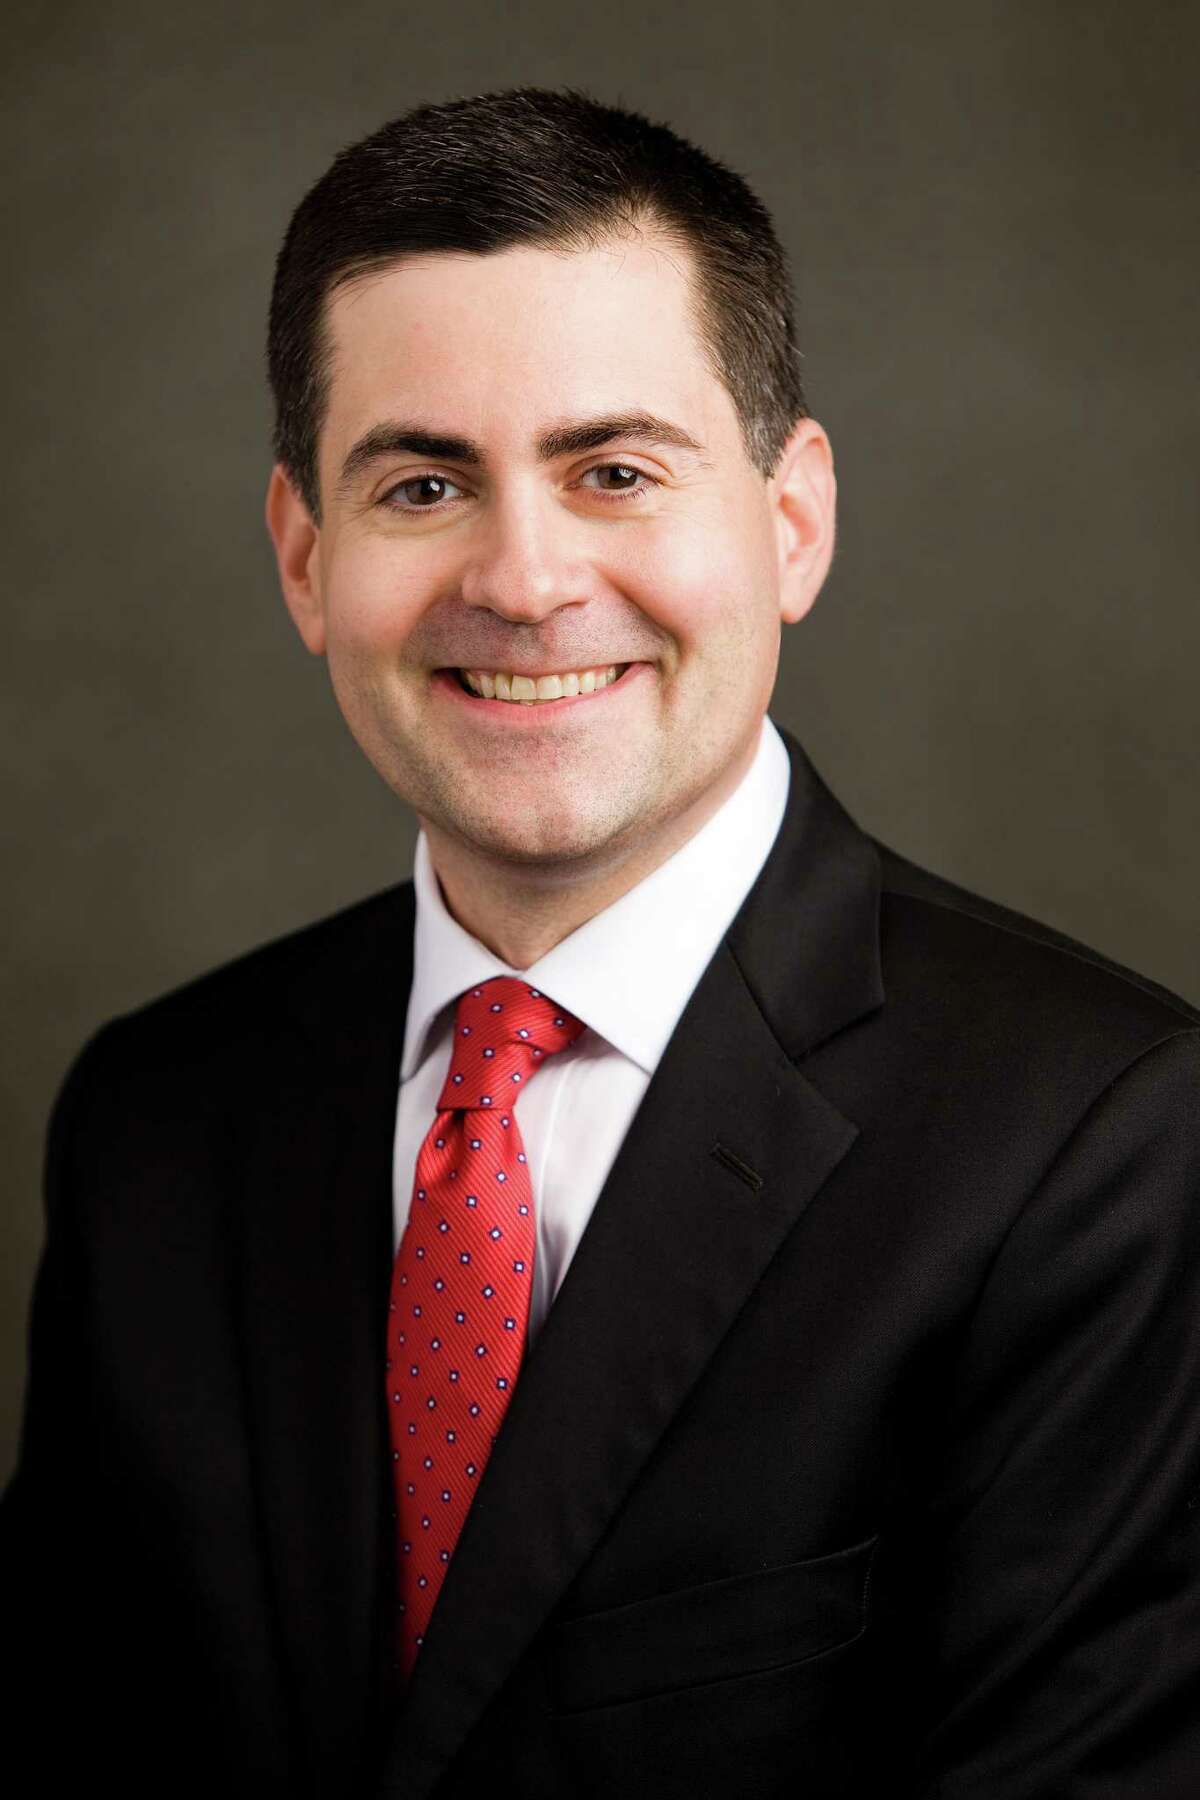 Russell Moore, dean of the School of Theology at Southern Baptist Theological Seminary.